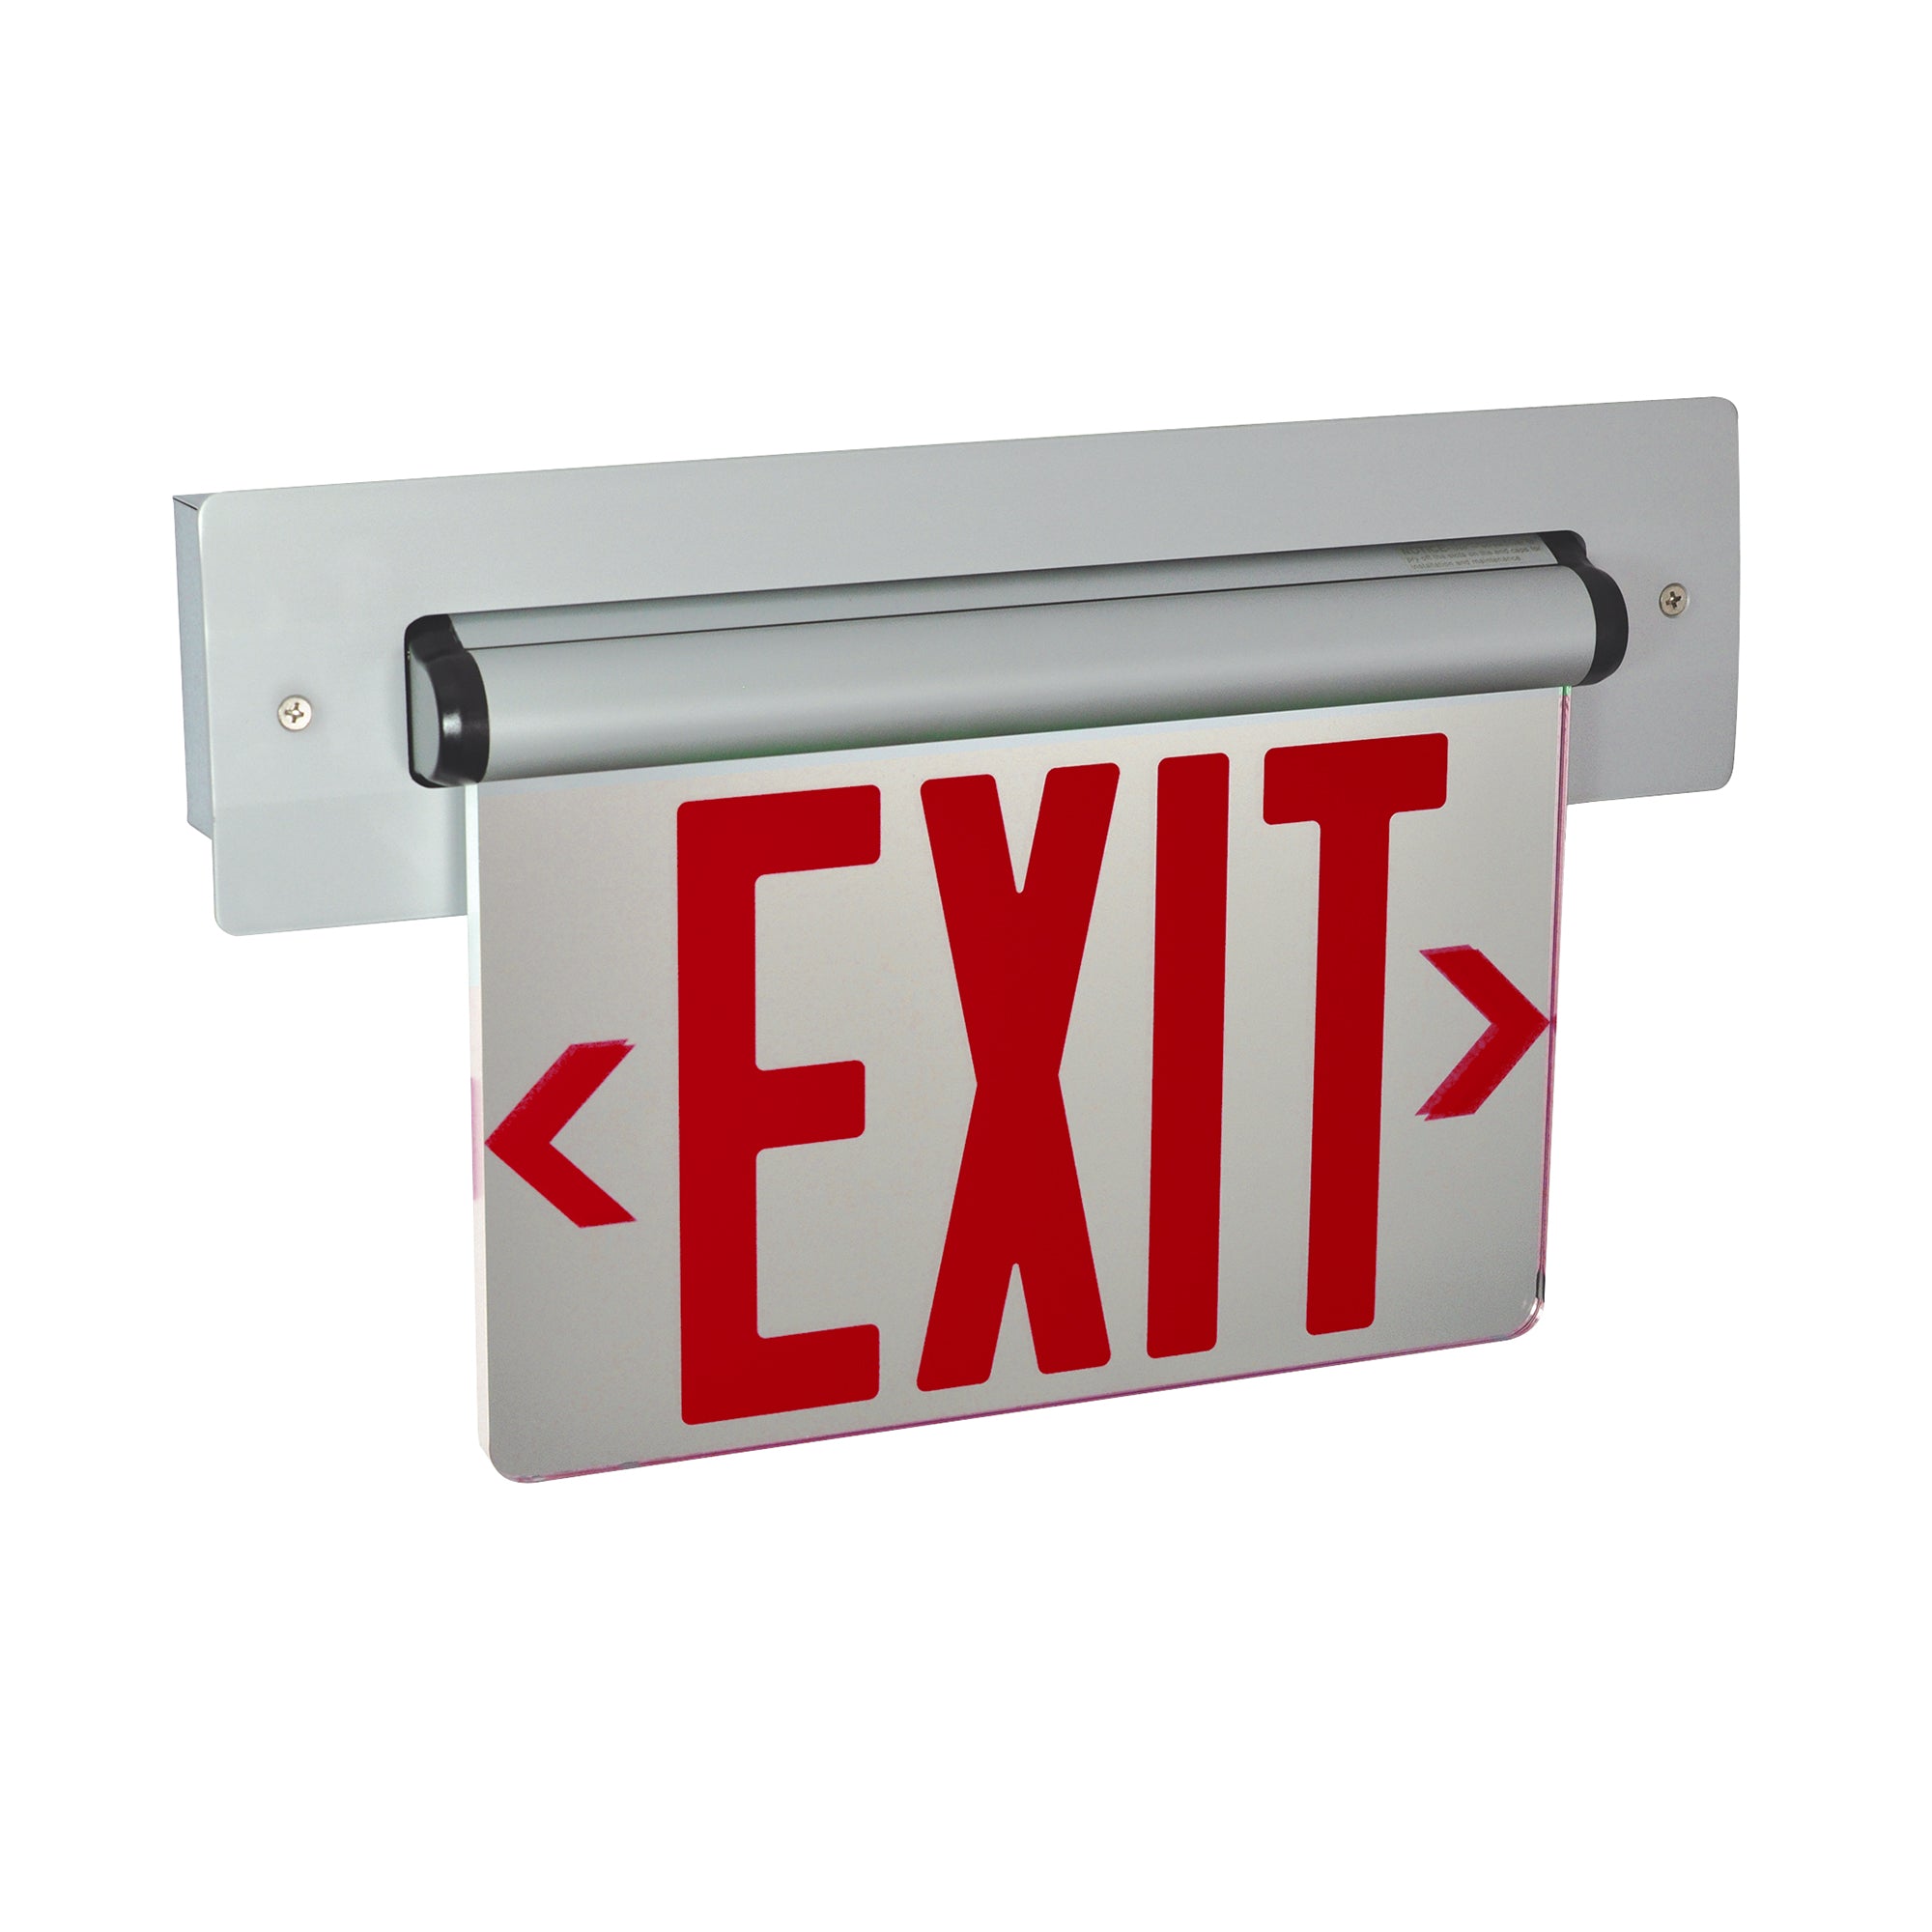 Nora Lighting NX-813-LEDR2MA - Exit / Emergency - Recessed Adjustable LED Edge-Lit Exit Sign, AC Only, 6 Inch Red Letters, Double Face / Mirrored Acrylic, Aluminum Housing